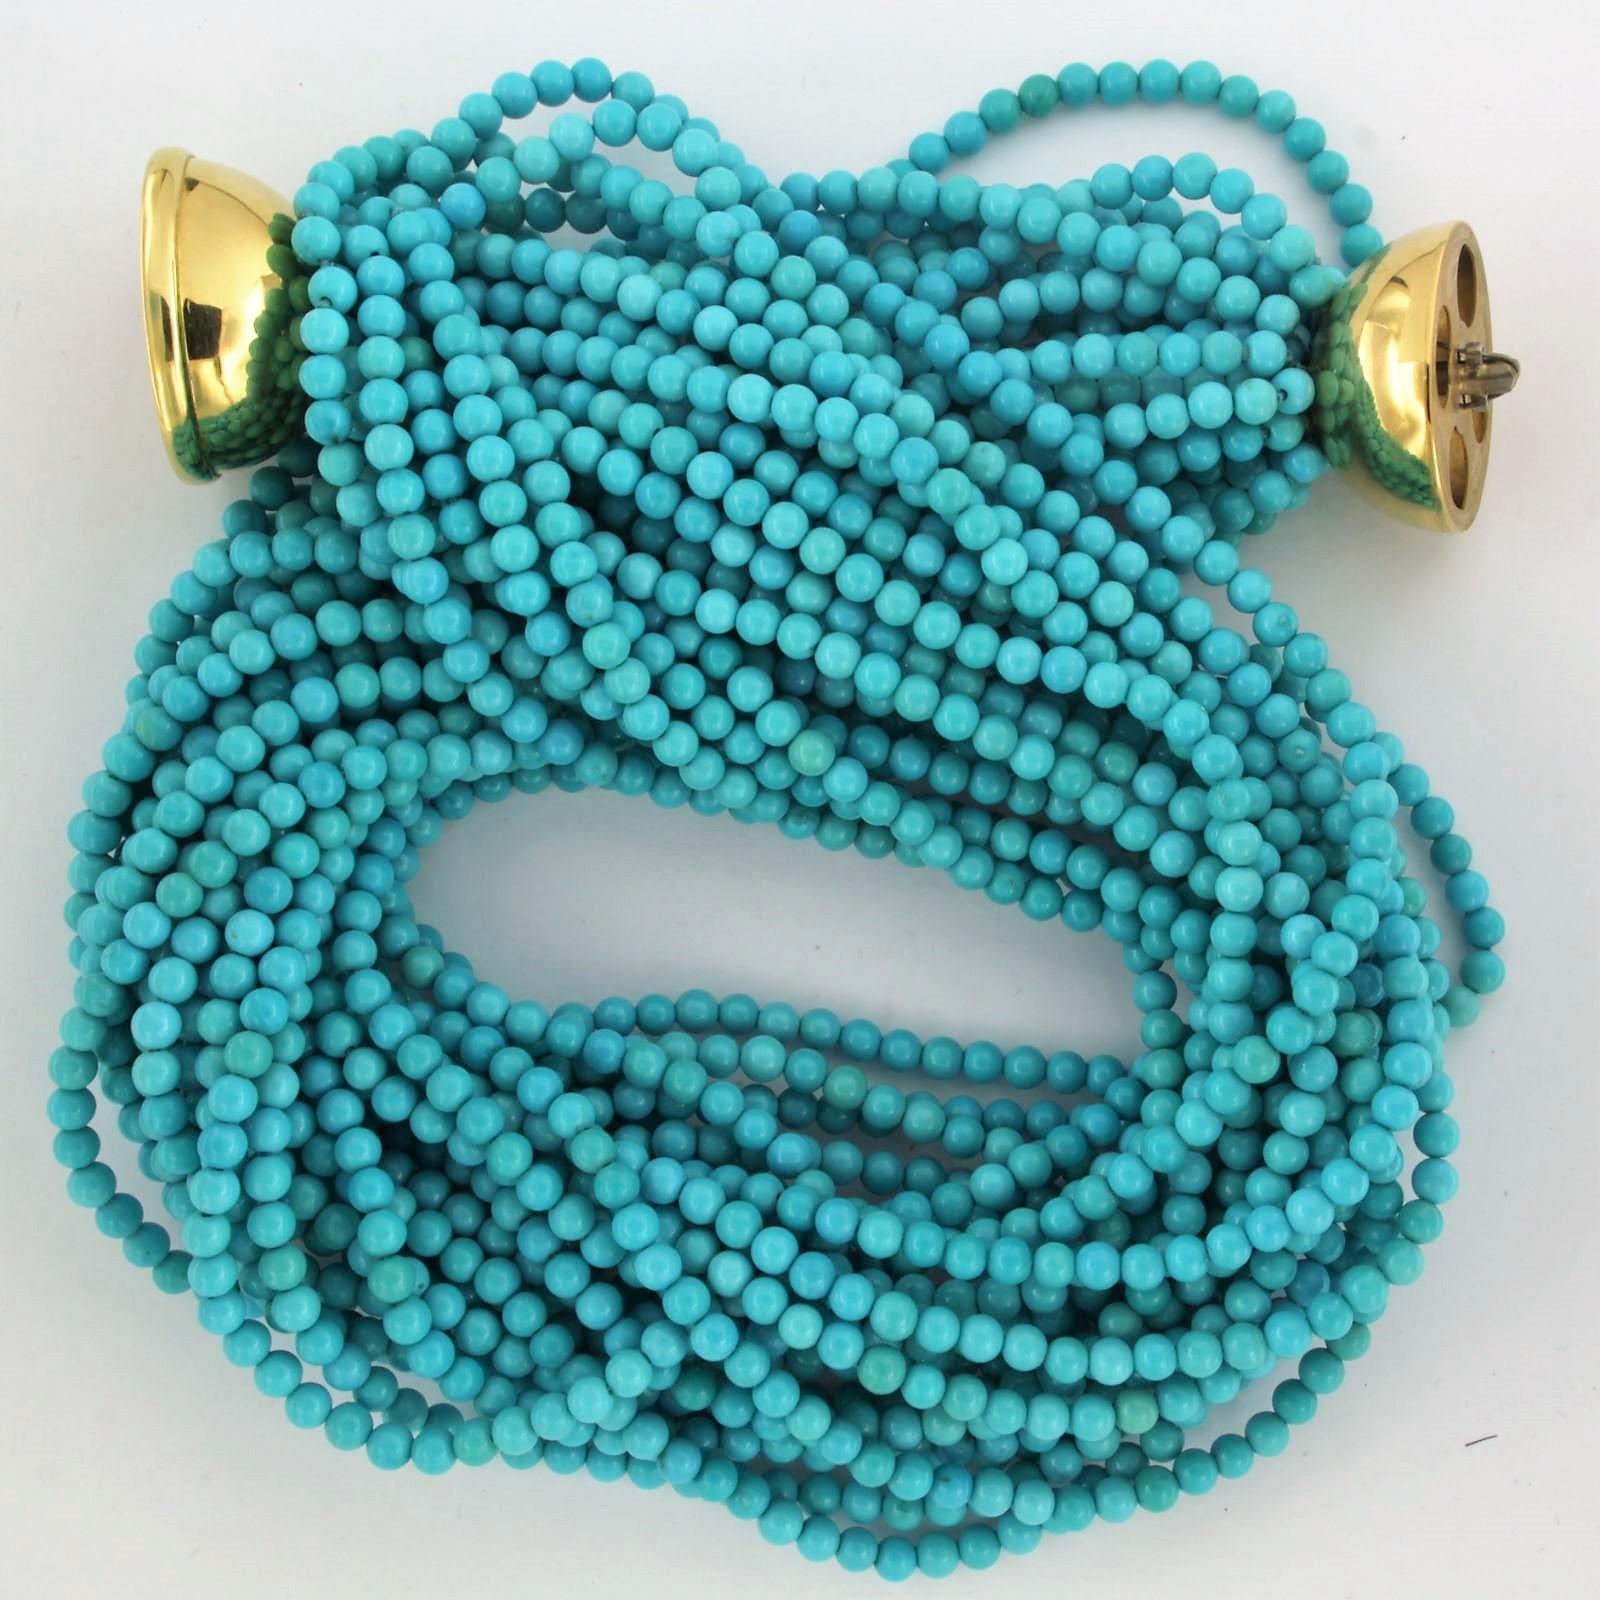 Necklace with turquoise beads on a 18k yellow gold lock For Sale 1